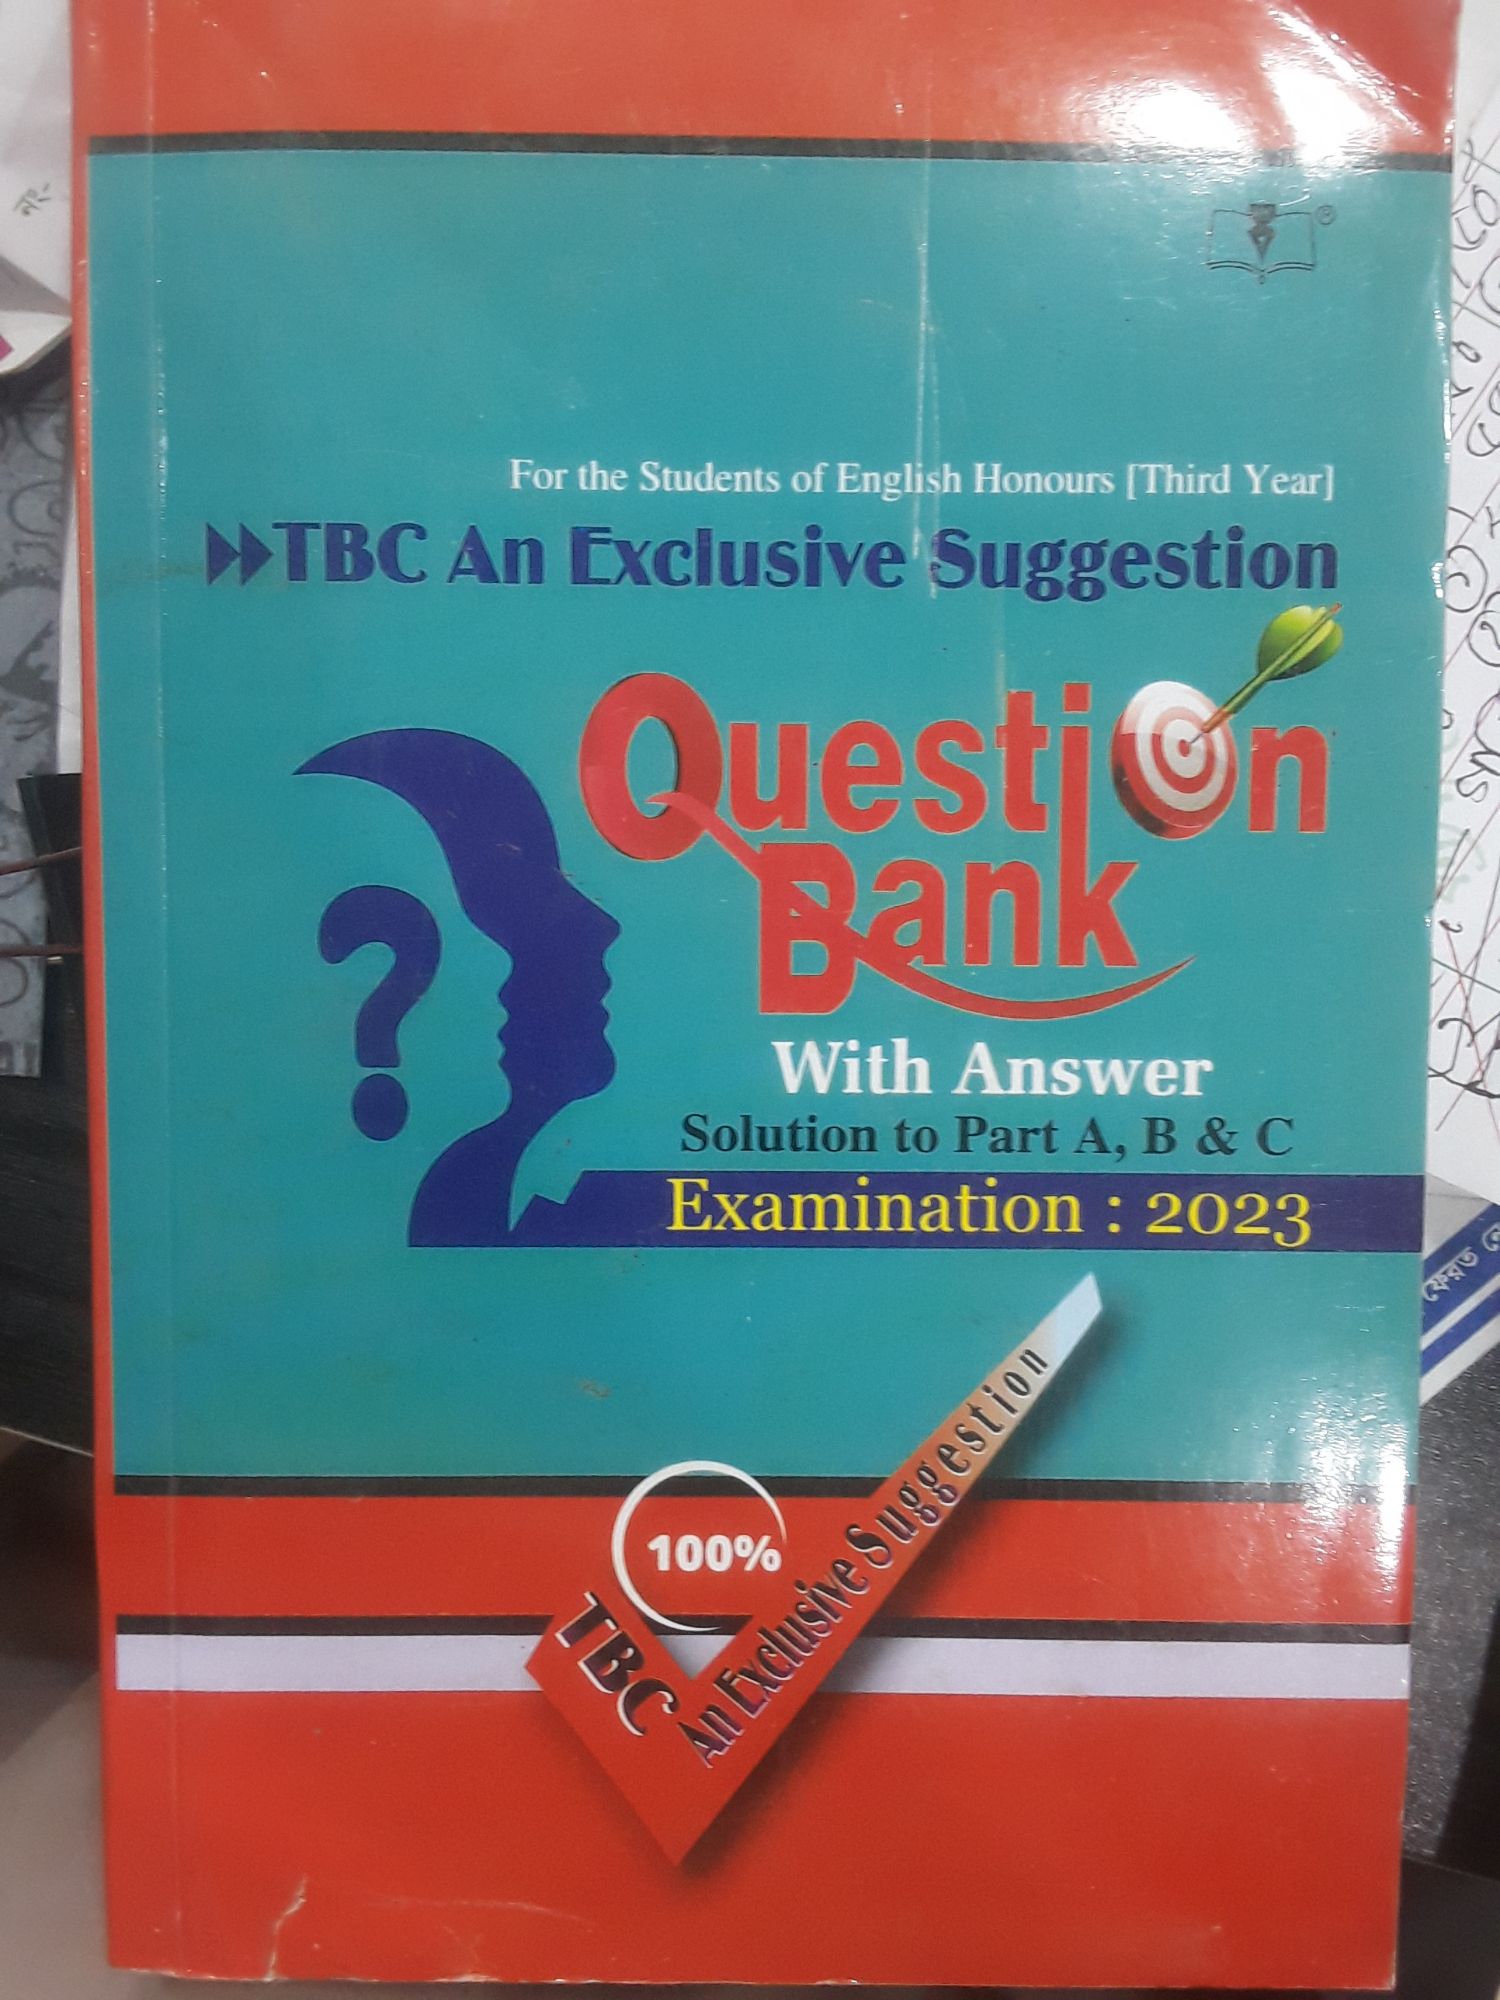 TBC Question bank 3rd year for English Department